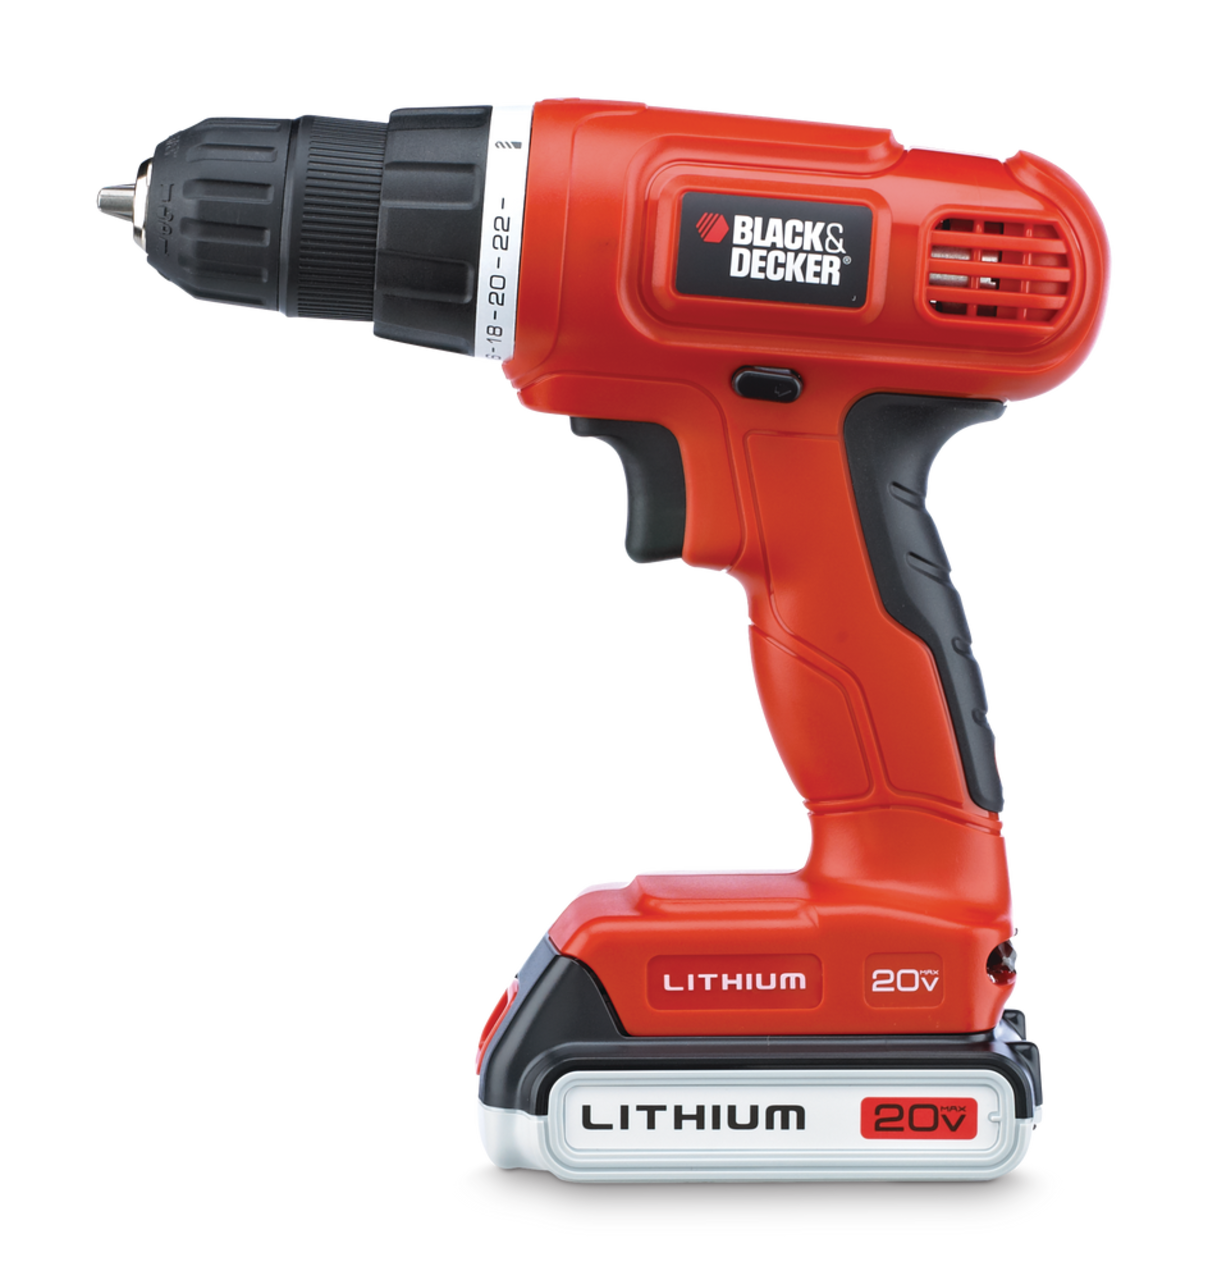 Black + Decker LD120 Type 1 (20V Max Lithium) Drill/Driver, Tool Only -  Tested